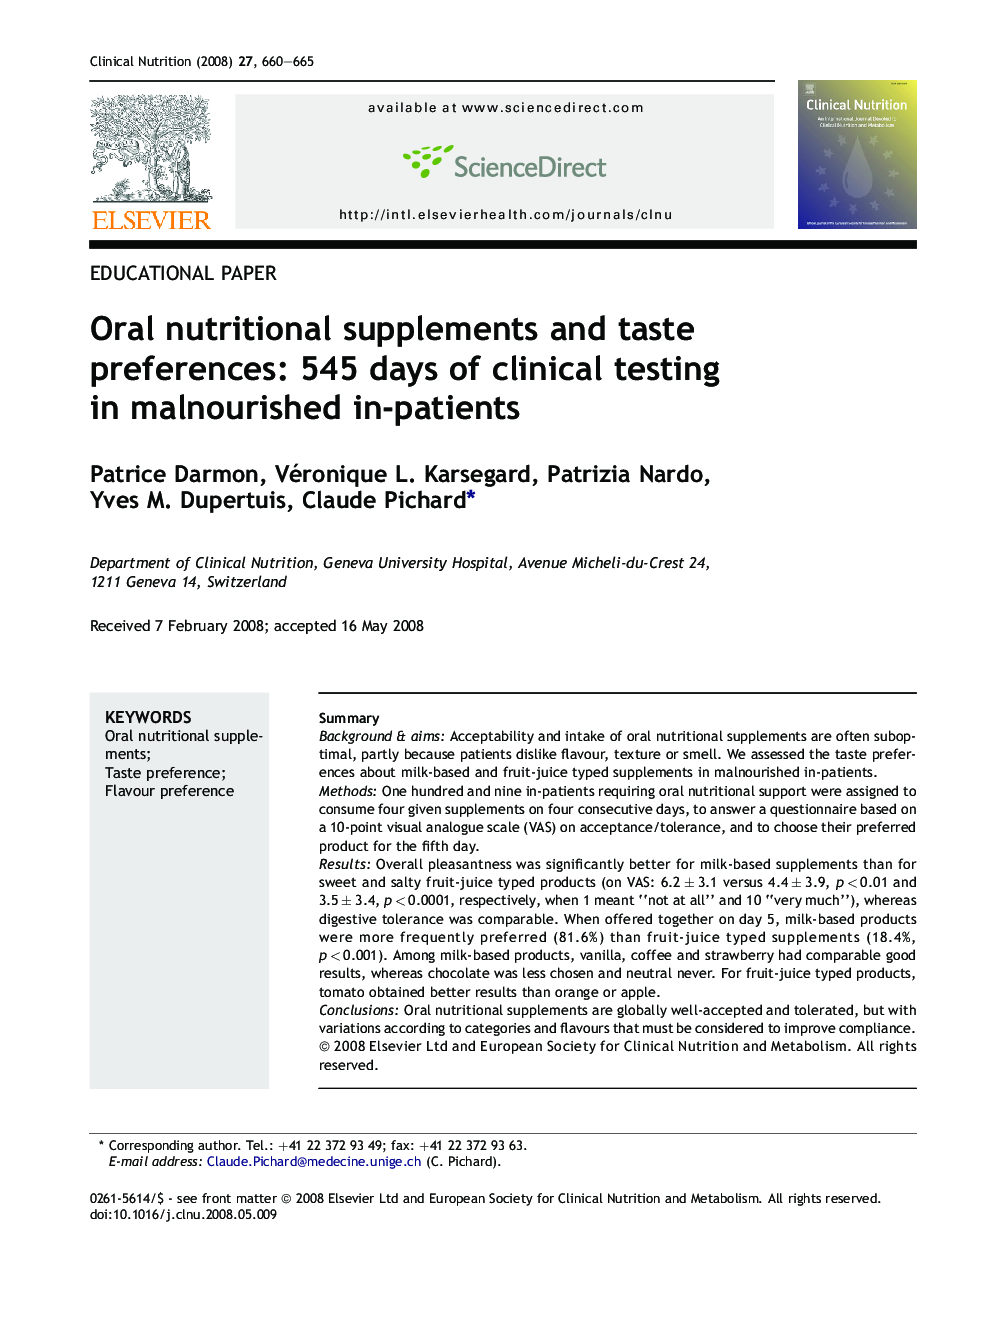 Oral nutritional supplements and taste preferences: 545 days of clinical testing in malnourished in-patients